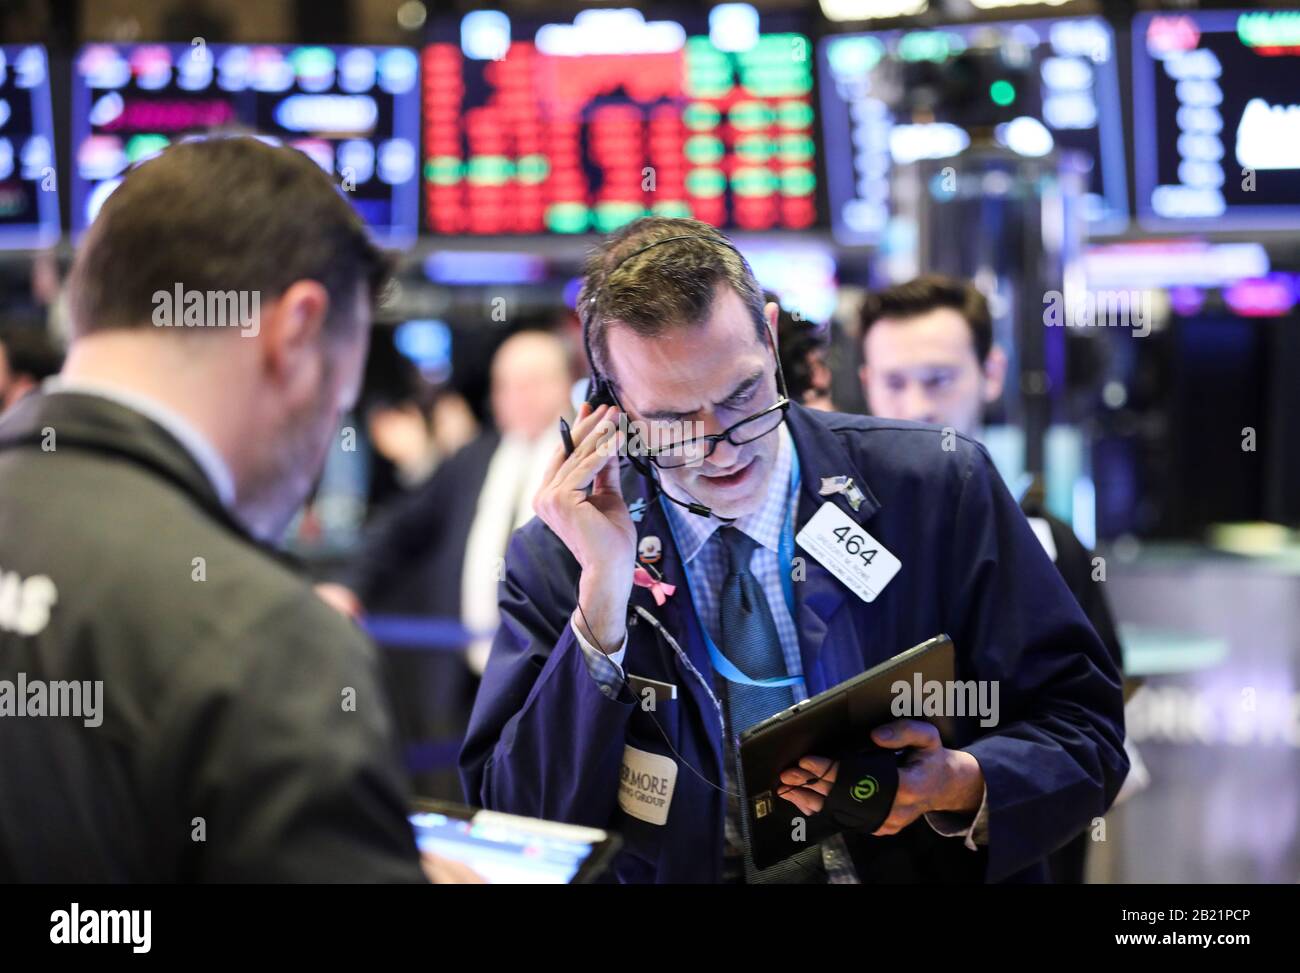 New York, USA. 28th Feb, 2020. Traders work at New York Stock Exchange in New York, the United States, on Feb. 28, 2020. U.S. stocks ended mixed on Friday. The Dow was down 1.39 percent to 25,409.36, the S&P 500 fell 0.82 percent to 2,954.22, and the Nasdaq was up 0.01 percent to 8,567.37. Credit: Wang Ying/Xinhua/Alamy Live News Stock Photo